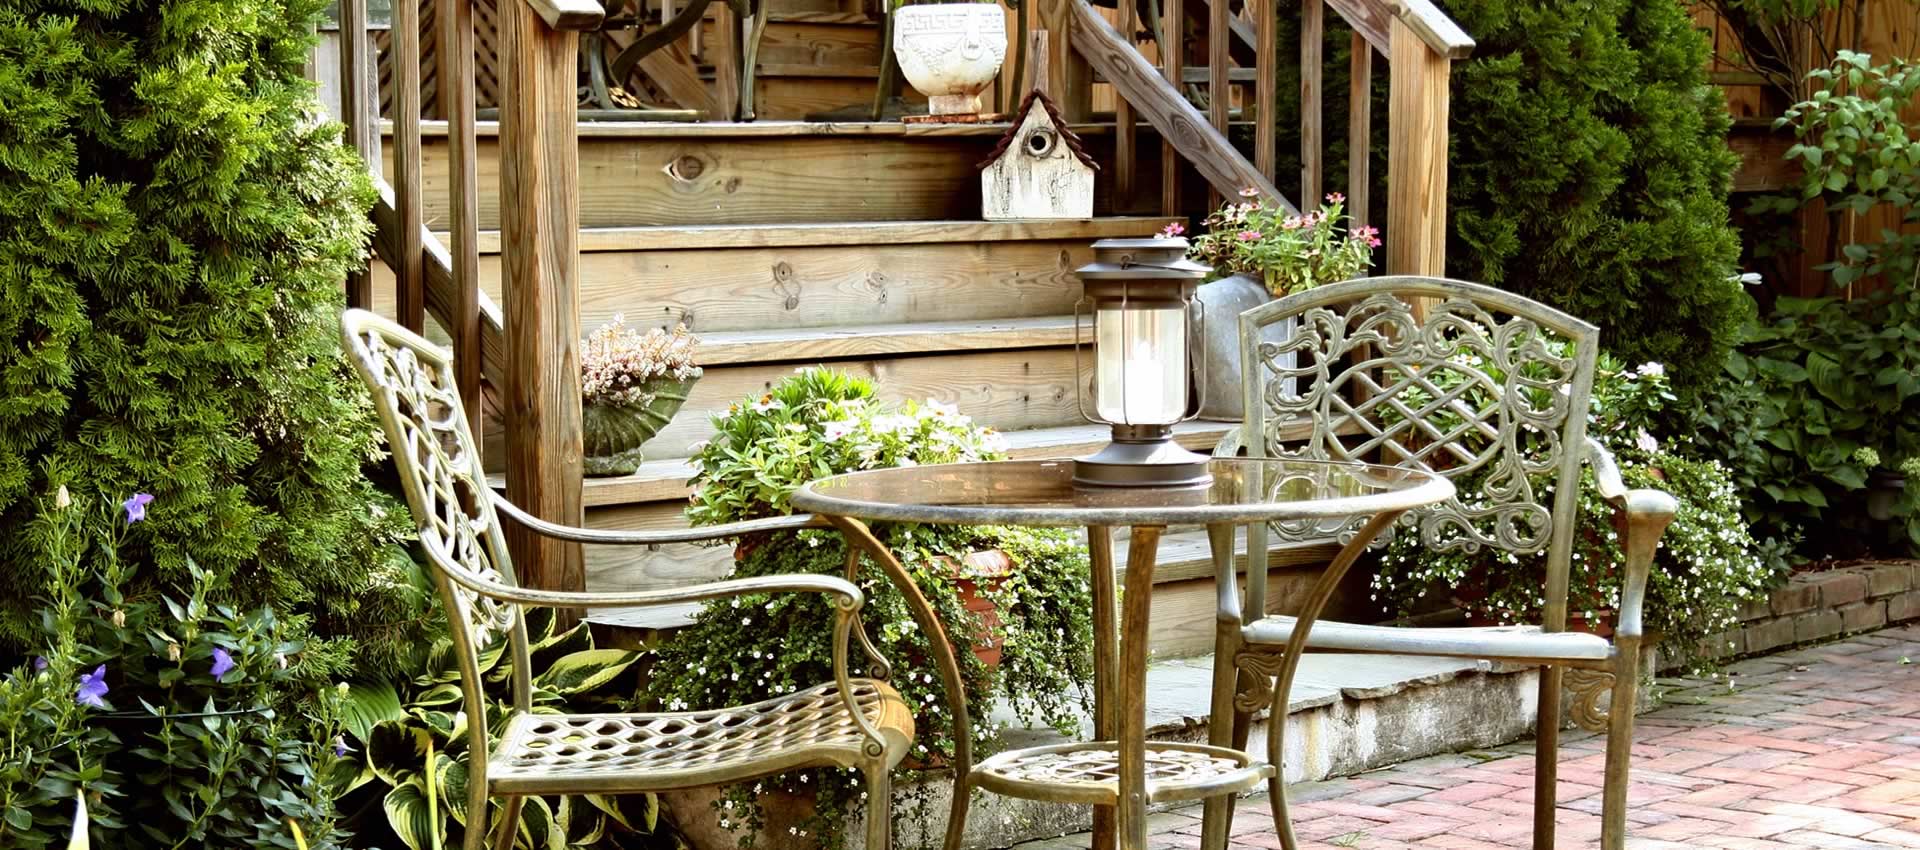 The Brafferton garden patio with tables and chairs